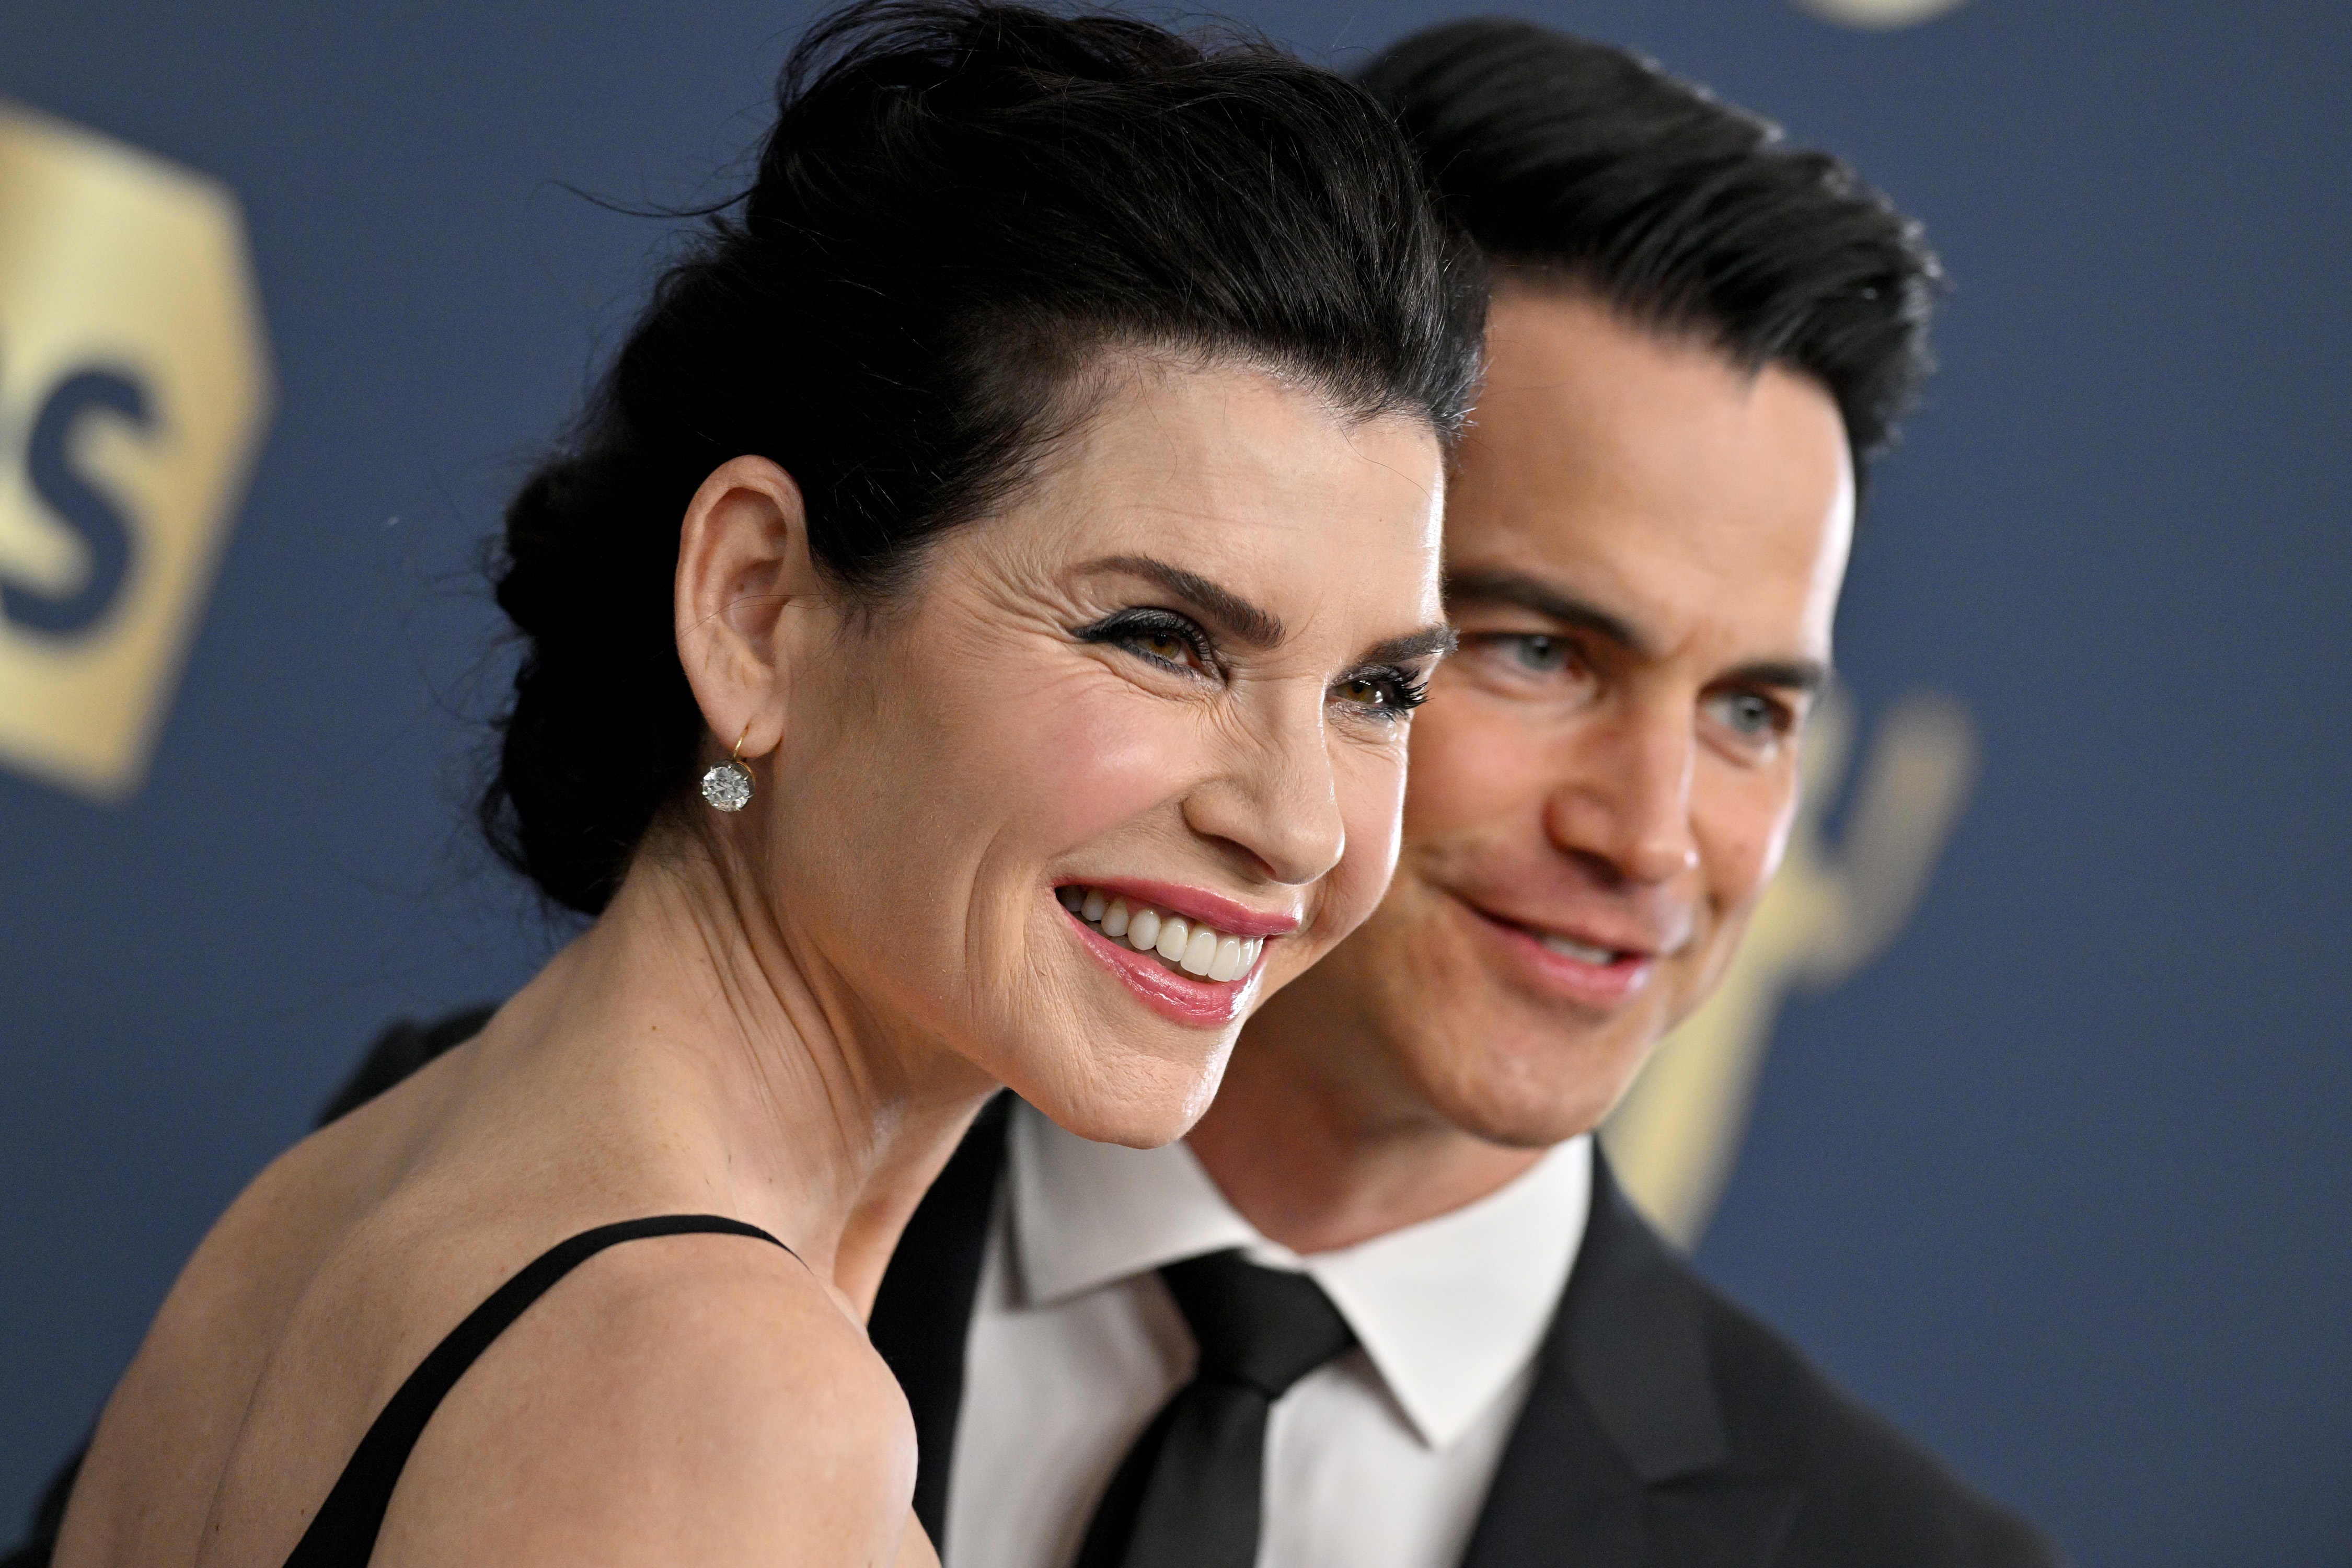 Julianna Margulies and Keith Lieberthal at the 28th Annual Screen Actors Guild Awards on February 27, 2022, in Santa Monica, California. | Source: Getty Images